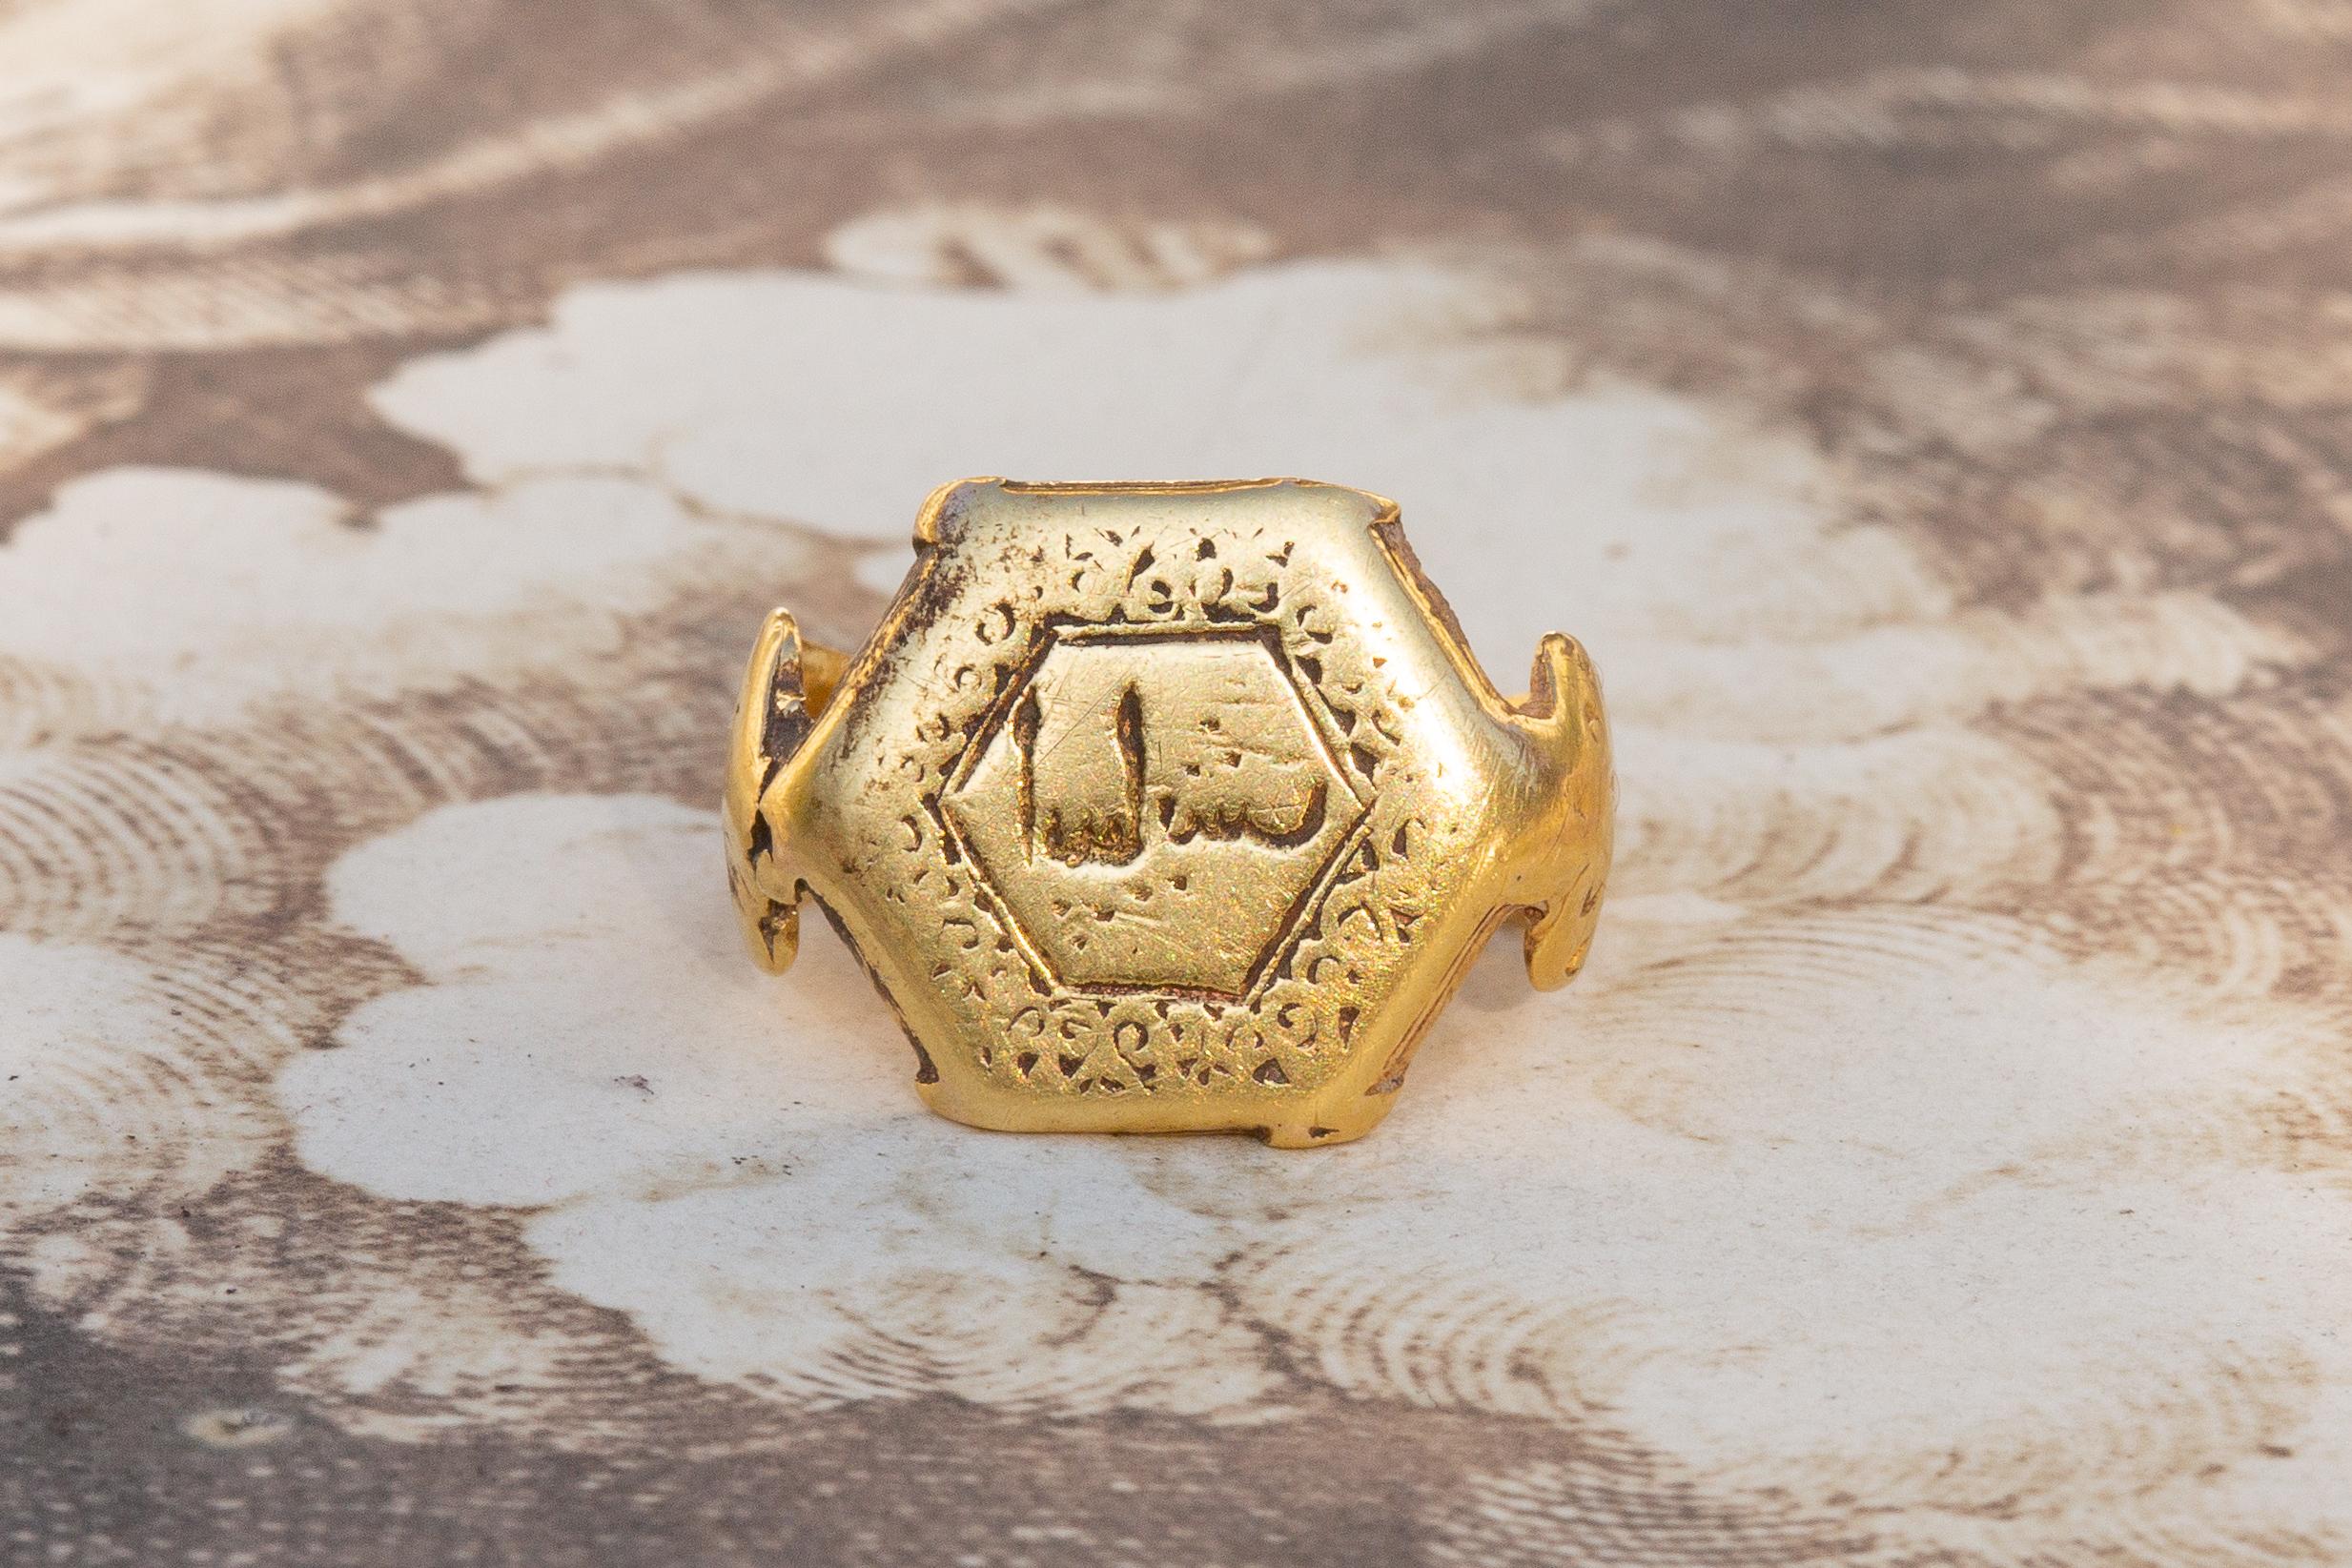 This quite small (yet mighty) 21K gold ring dates to the 11-13th century Seljuk dynasty. The hexagonal bezel features a negative cursive inscription within a border containing arabesque scrolled patterns. There is a waisted section between the bezel